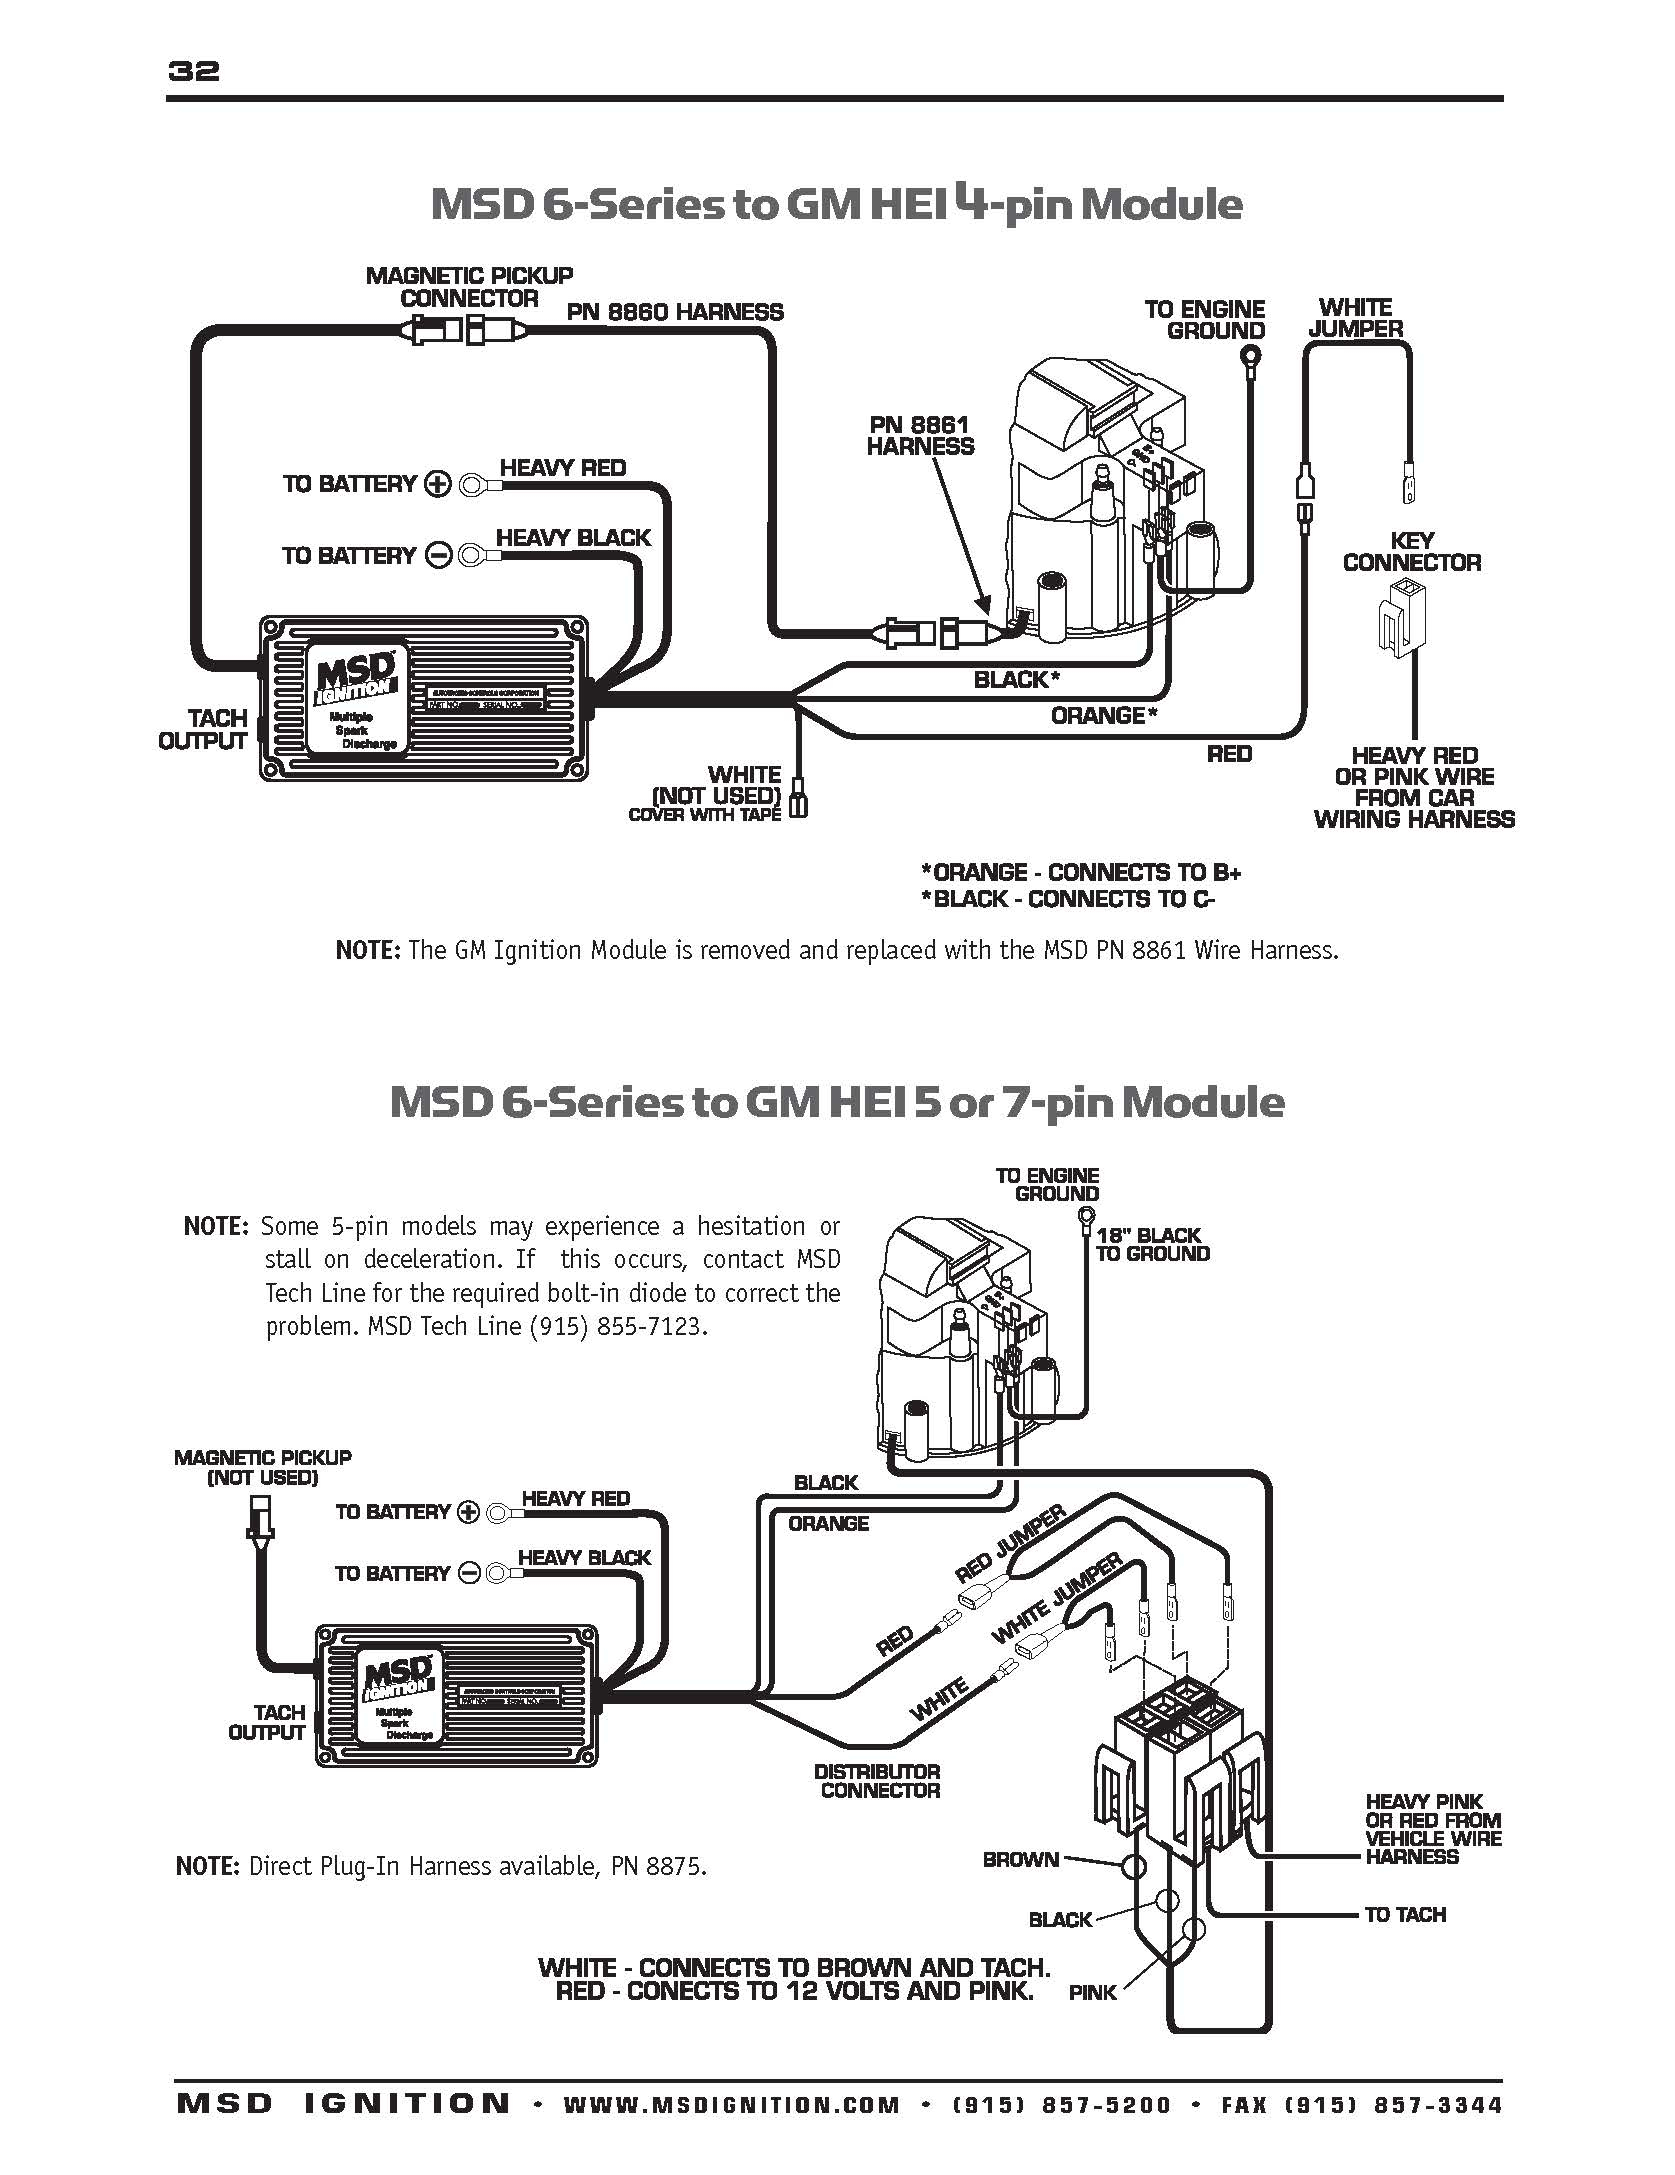 Msd Distributor Wiring Diagram Two Wire - Wiring Diagrams Hubs - Msd Distributor Wiring Diagram